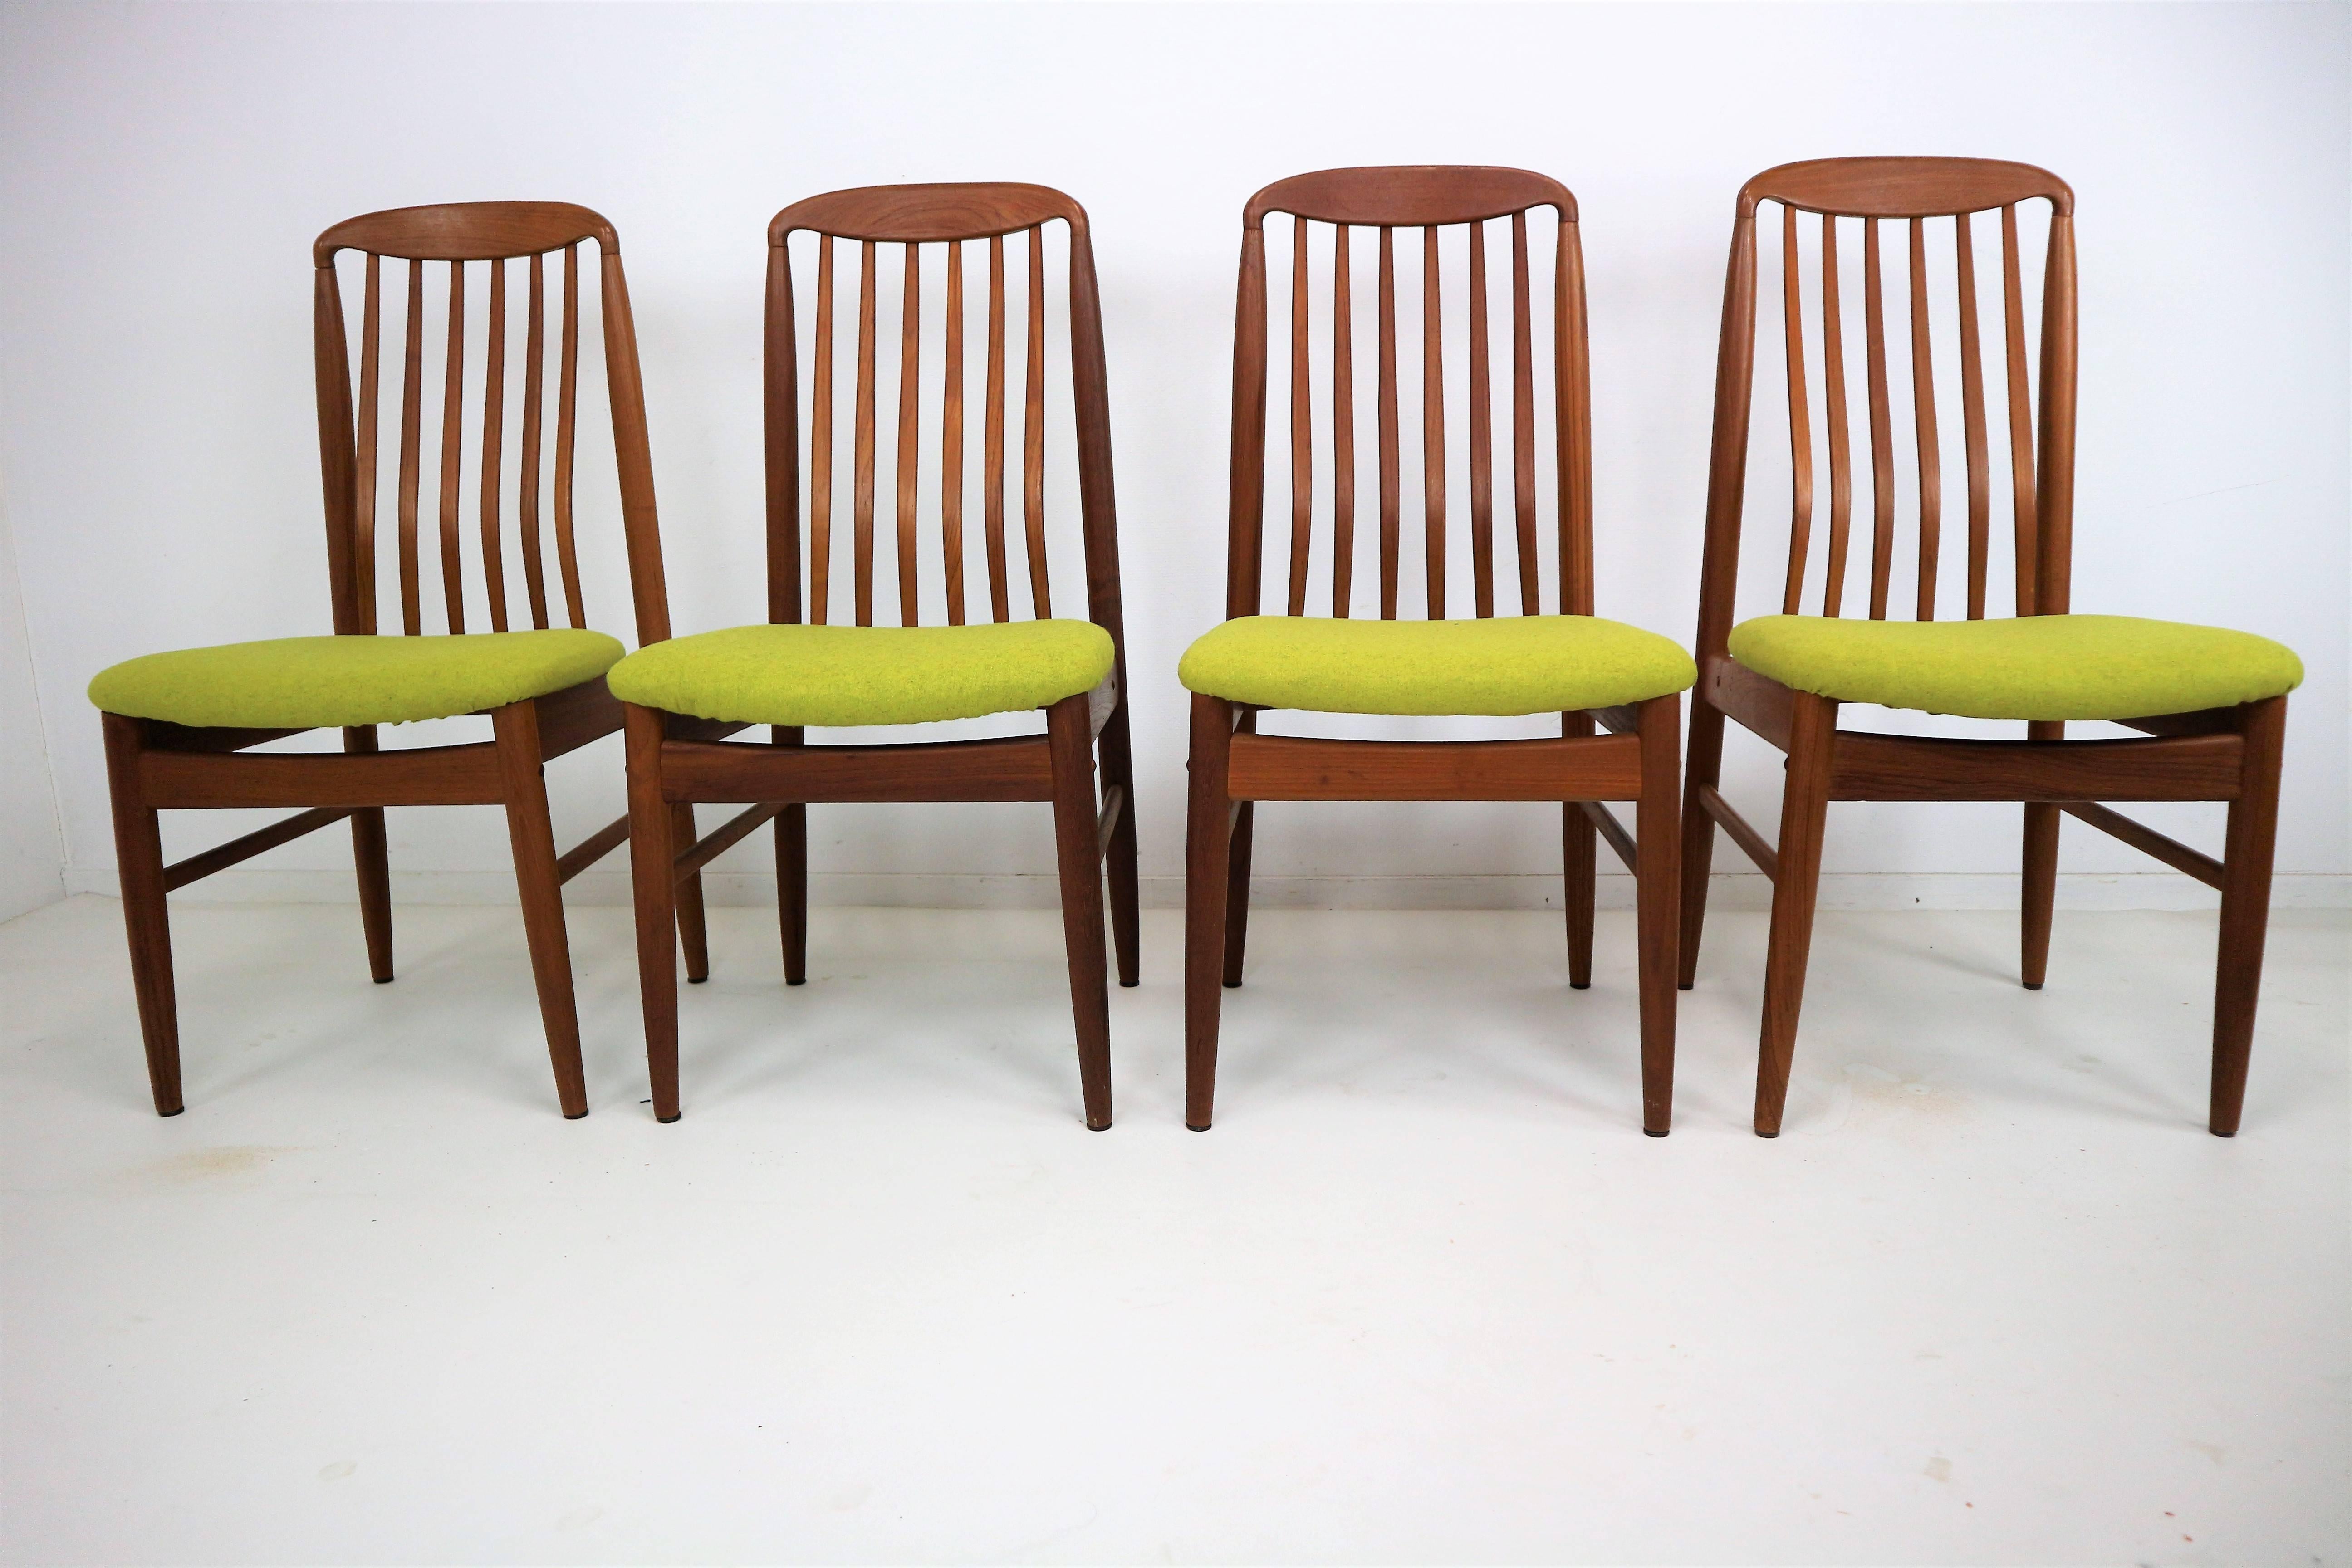 Set of four vintage Benny Linden teak dining chairs. Danish modern design, made in Thailand. Quality construction with graceful styling. Lines are beautifully contoured with the gentle curves. Contoured spindles lend ergonomic support to the back.